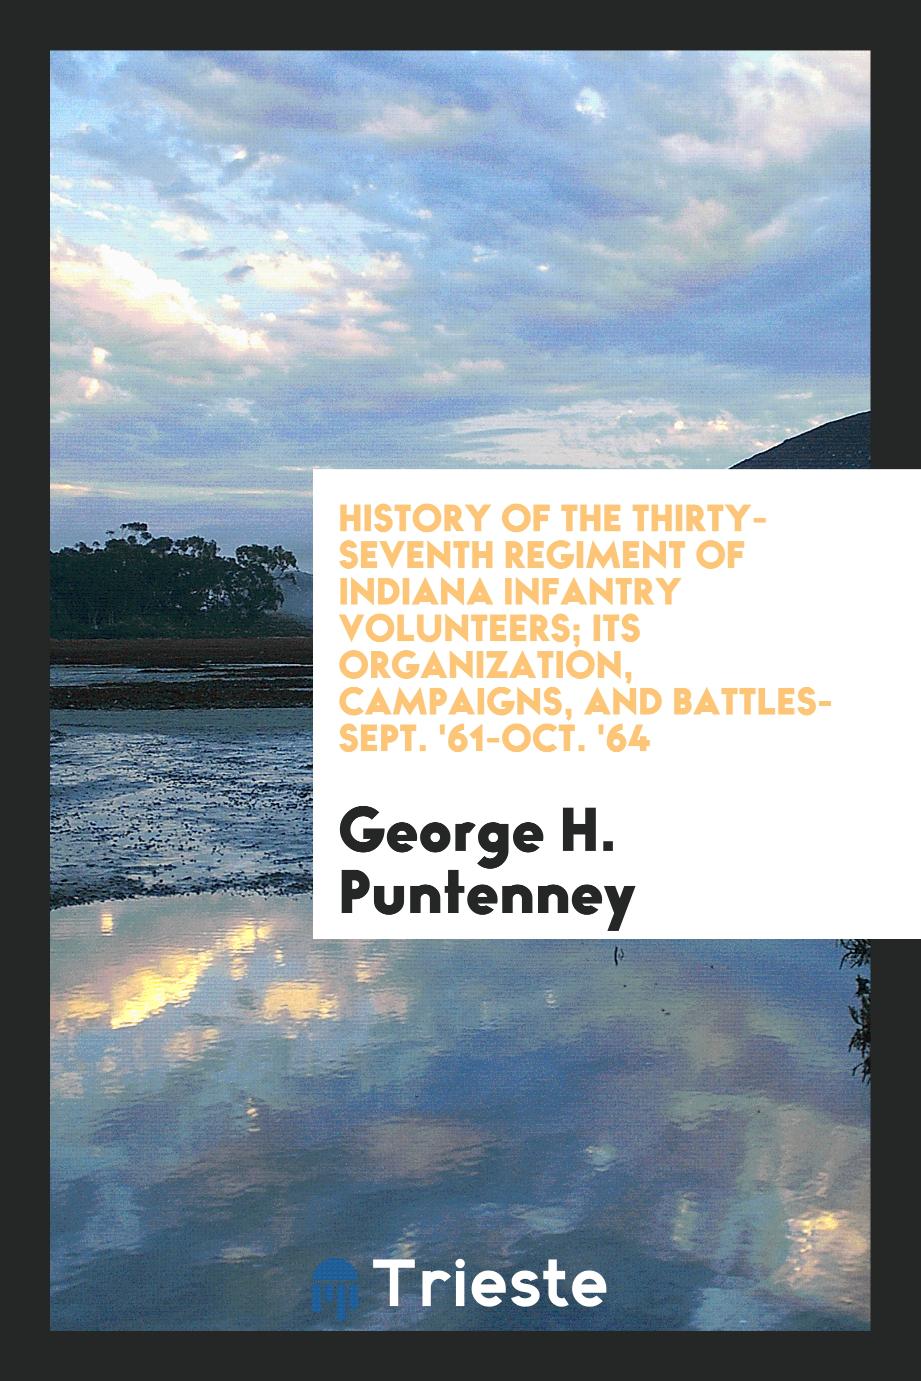 History of the Thirty-seventh regiment of Indiana infantry volunteers; its organization, campaigns, and battles-Sept. '61-Oct. '64